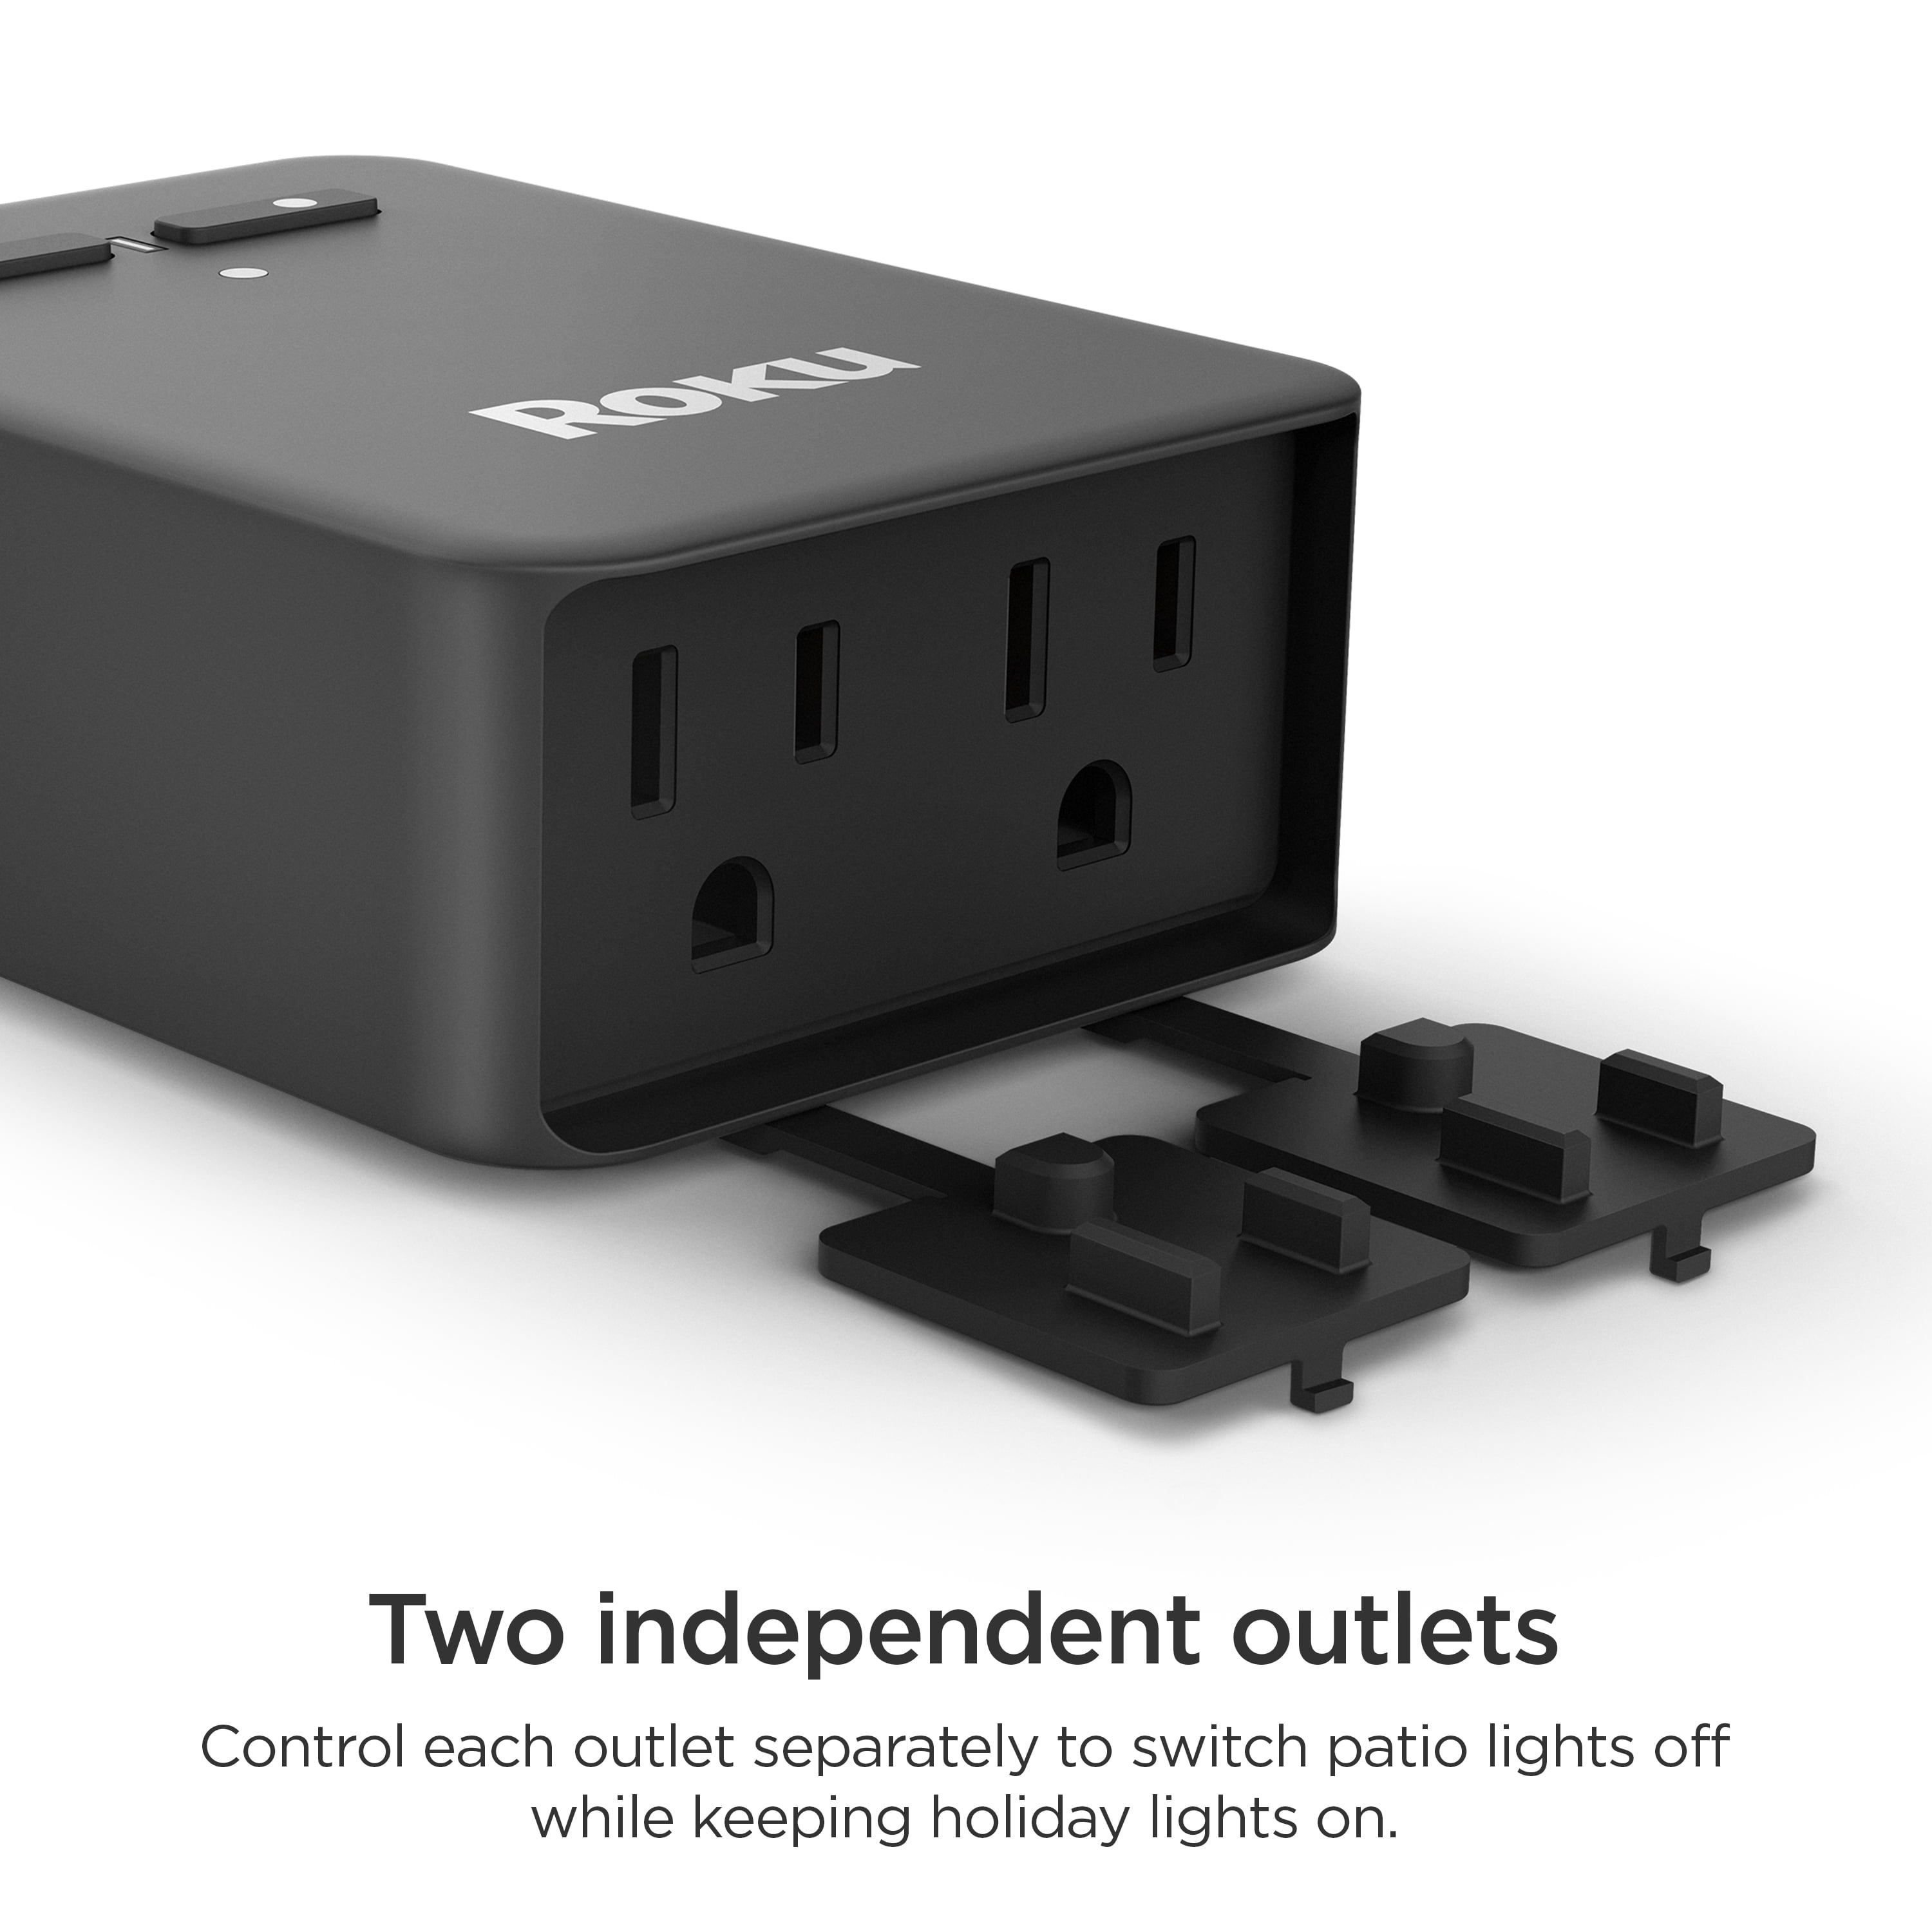 Roku Indoor Smart Plug SE review: A boring but necessary smart home device